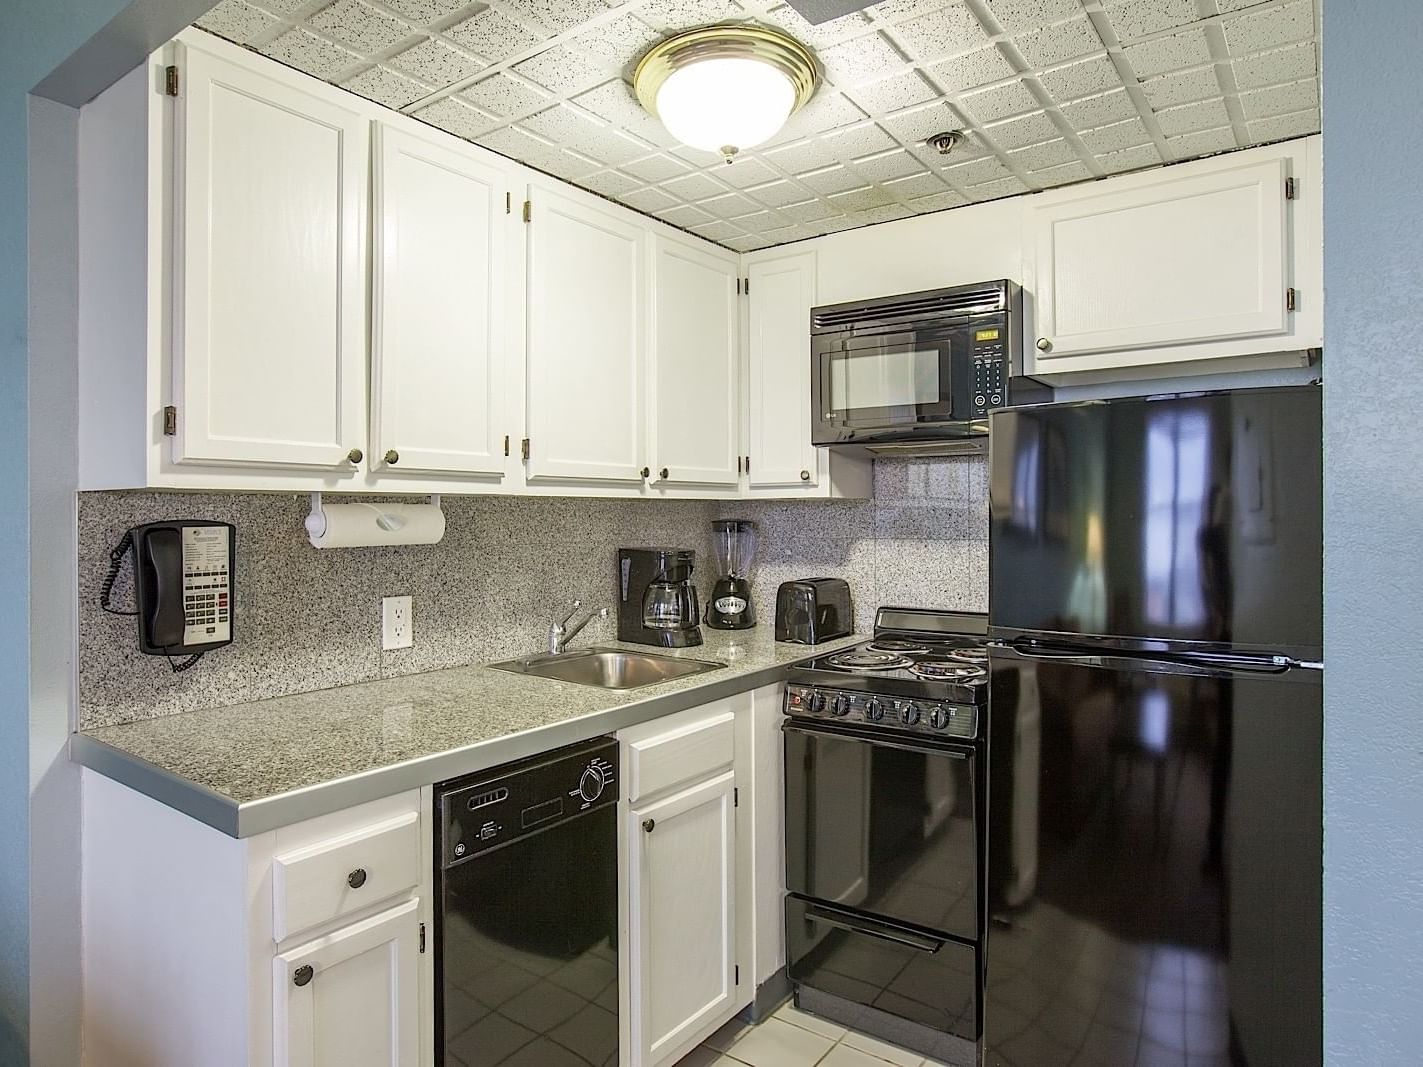 Kitchen of One Bedroom Premium Suite at Legacy Vacation Resorts